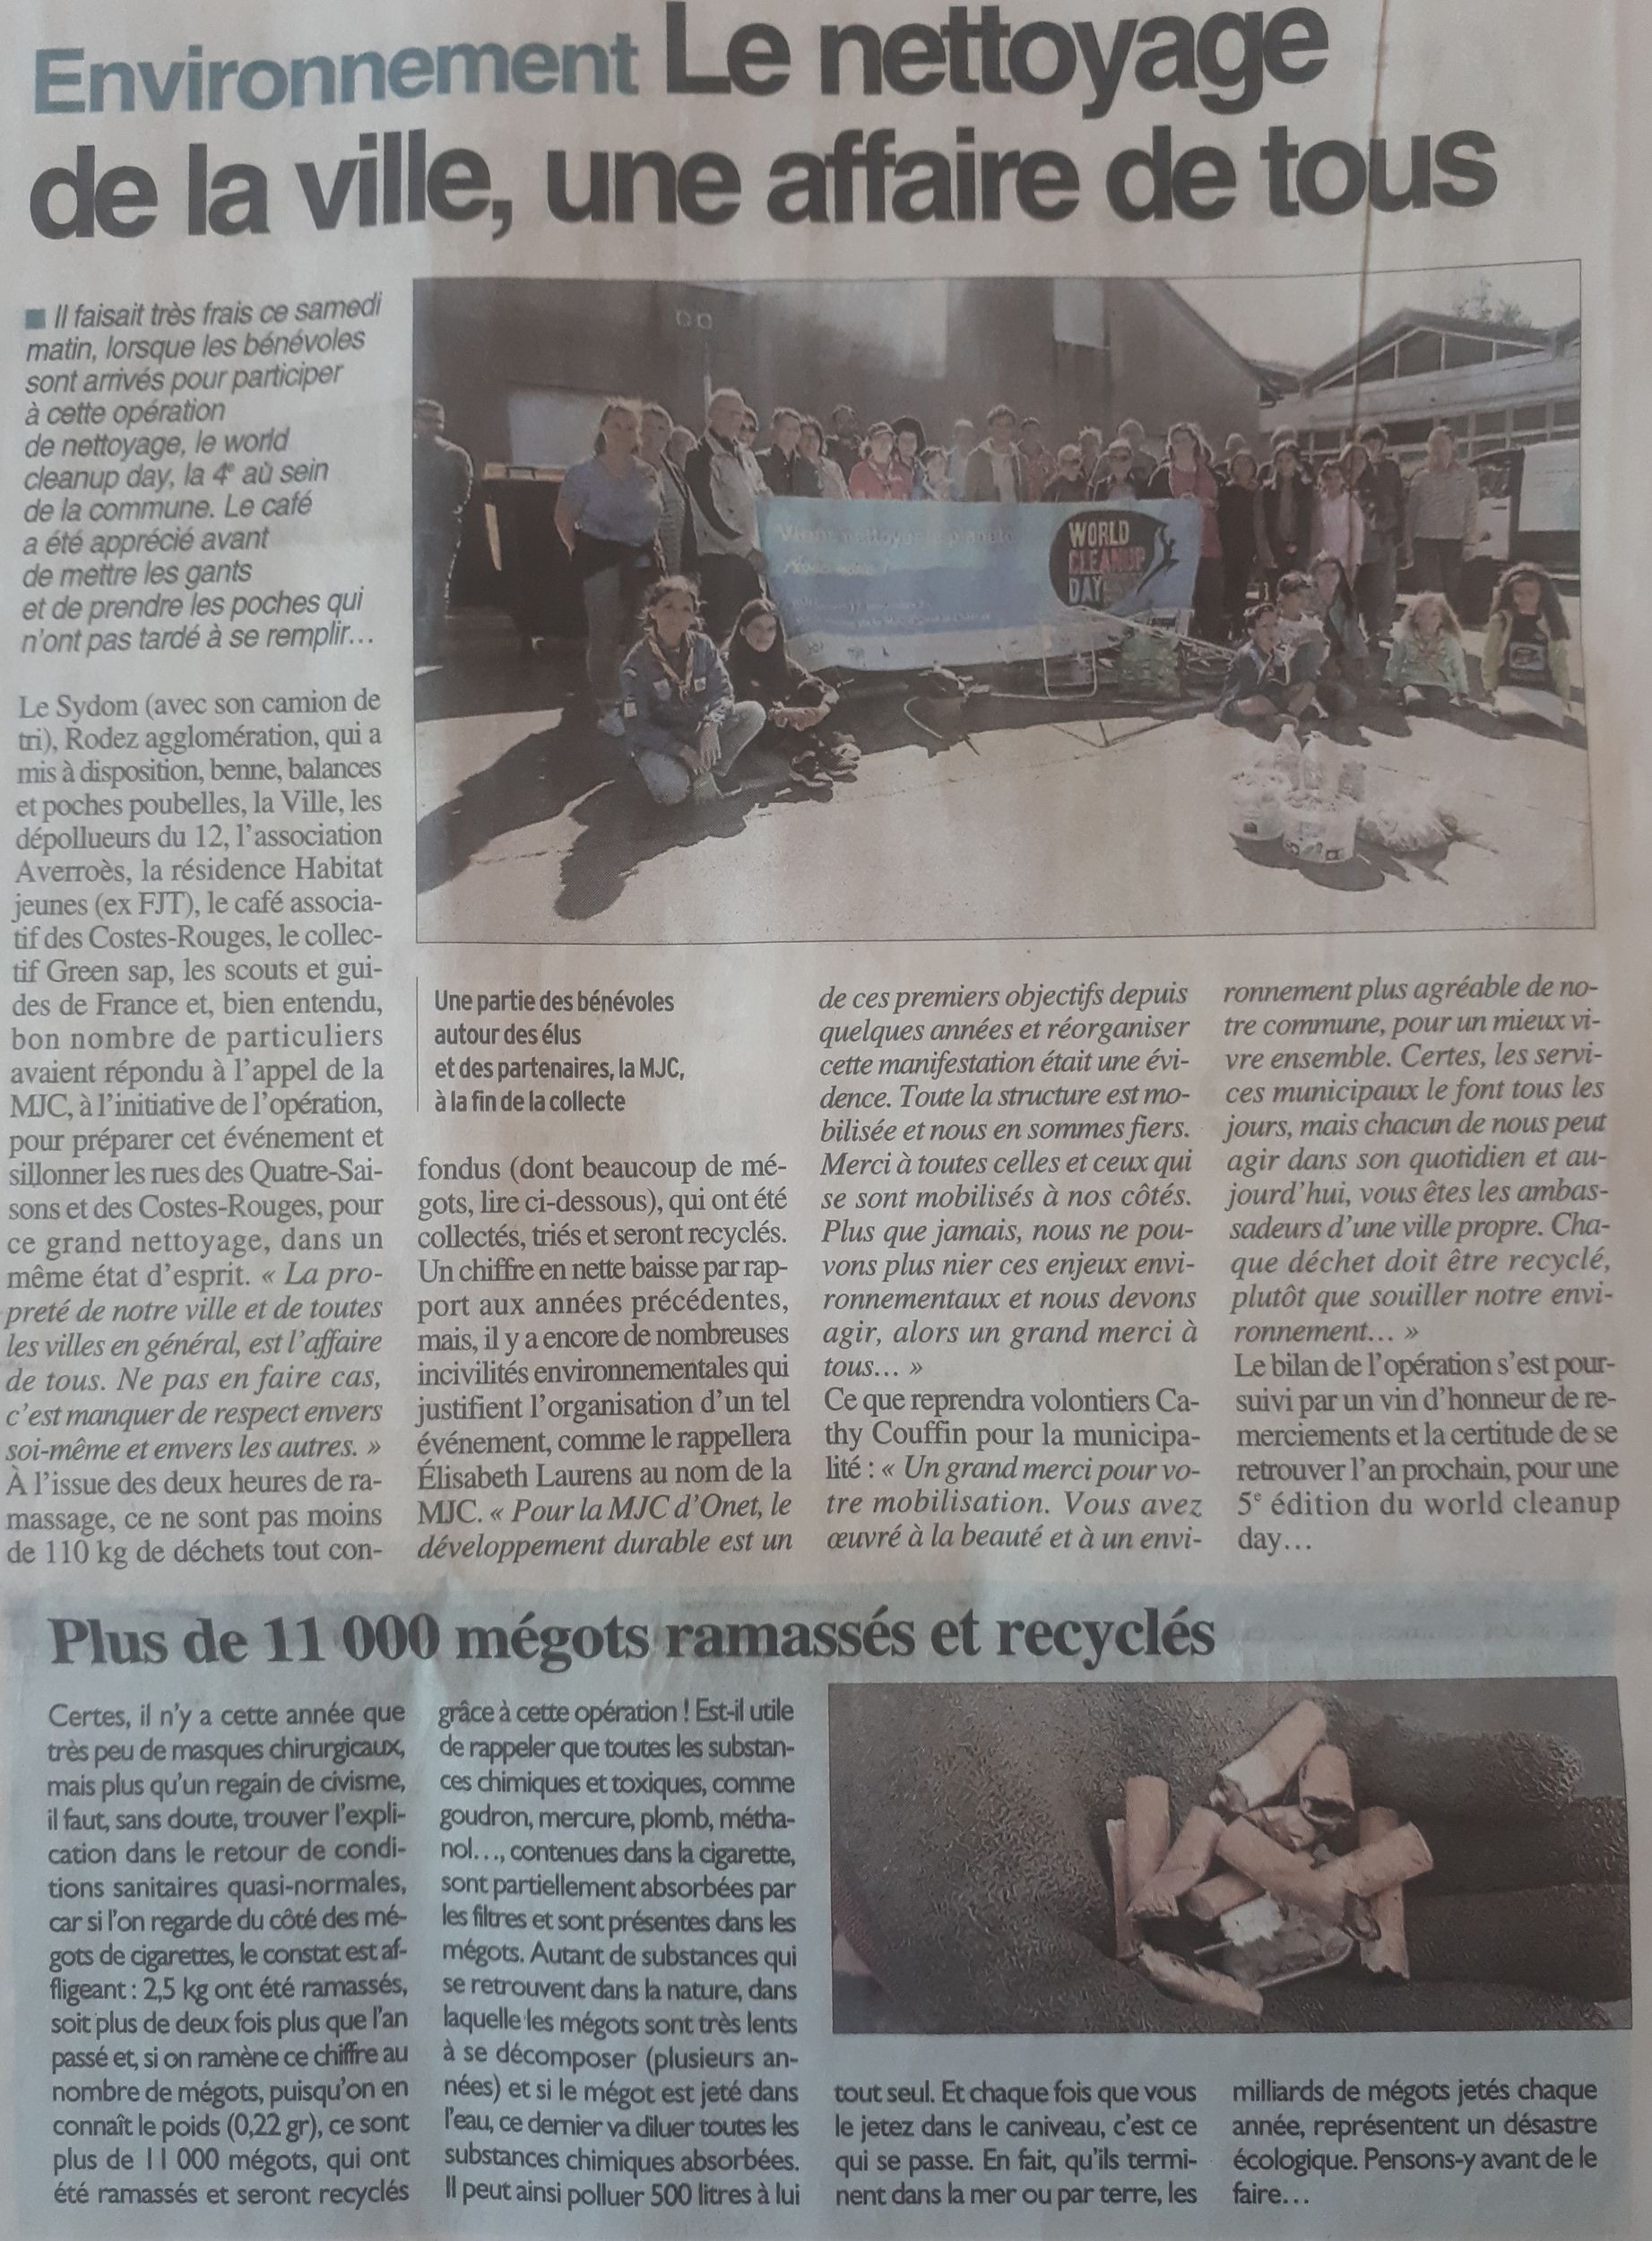 World Clean Up Day - Centre Presse 19/09/2022